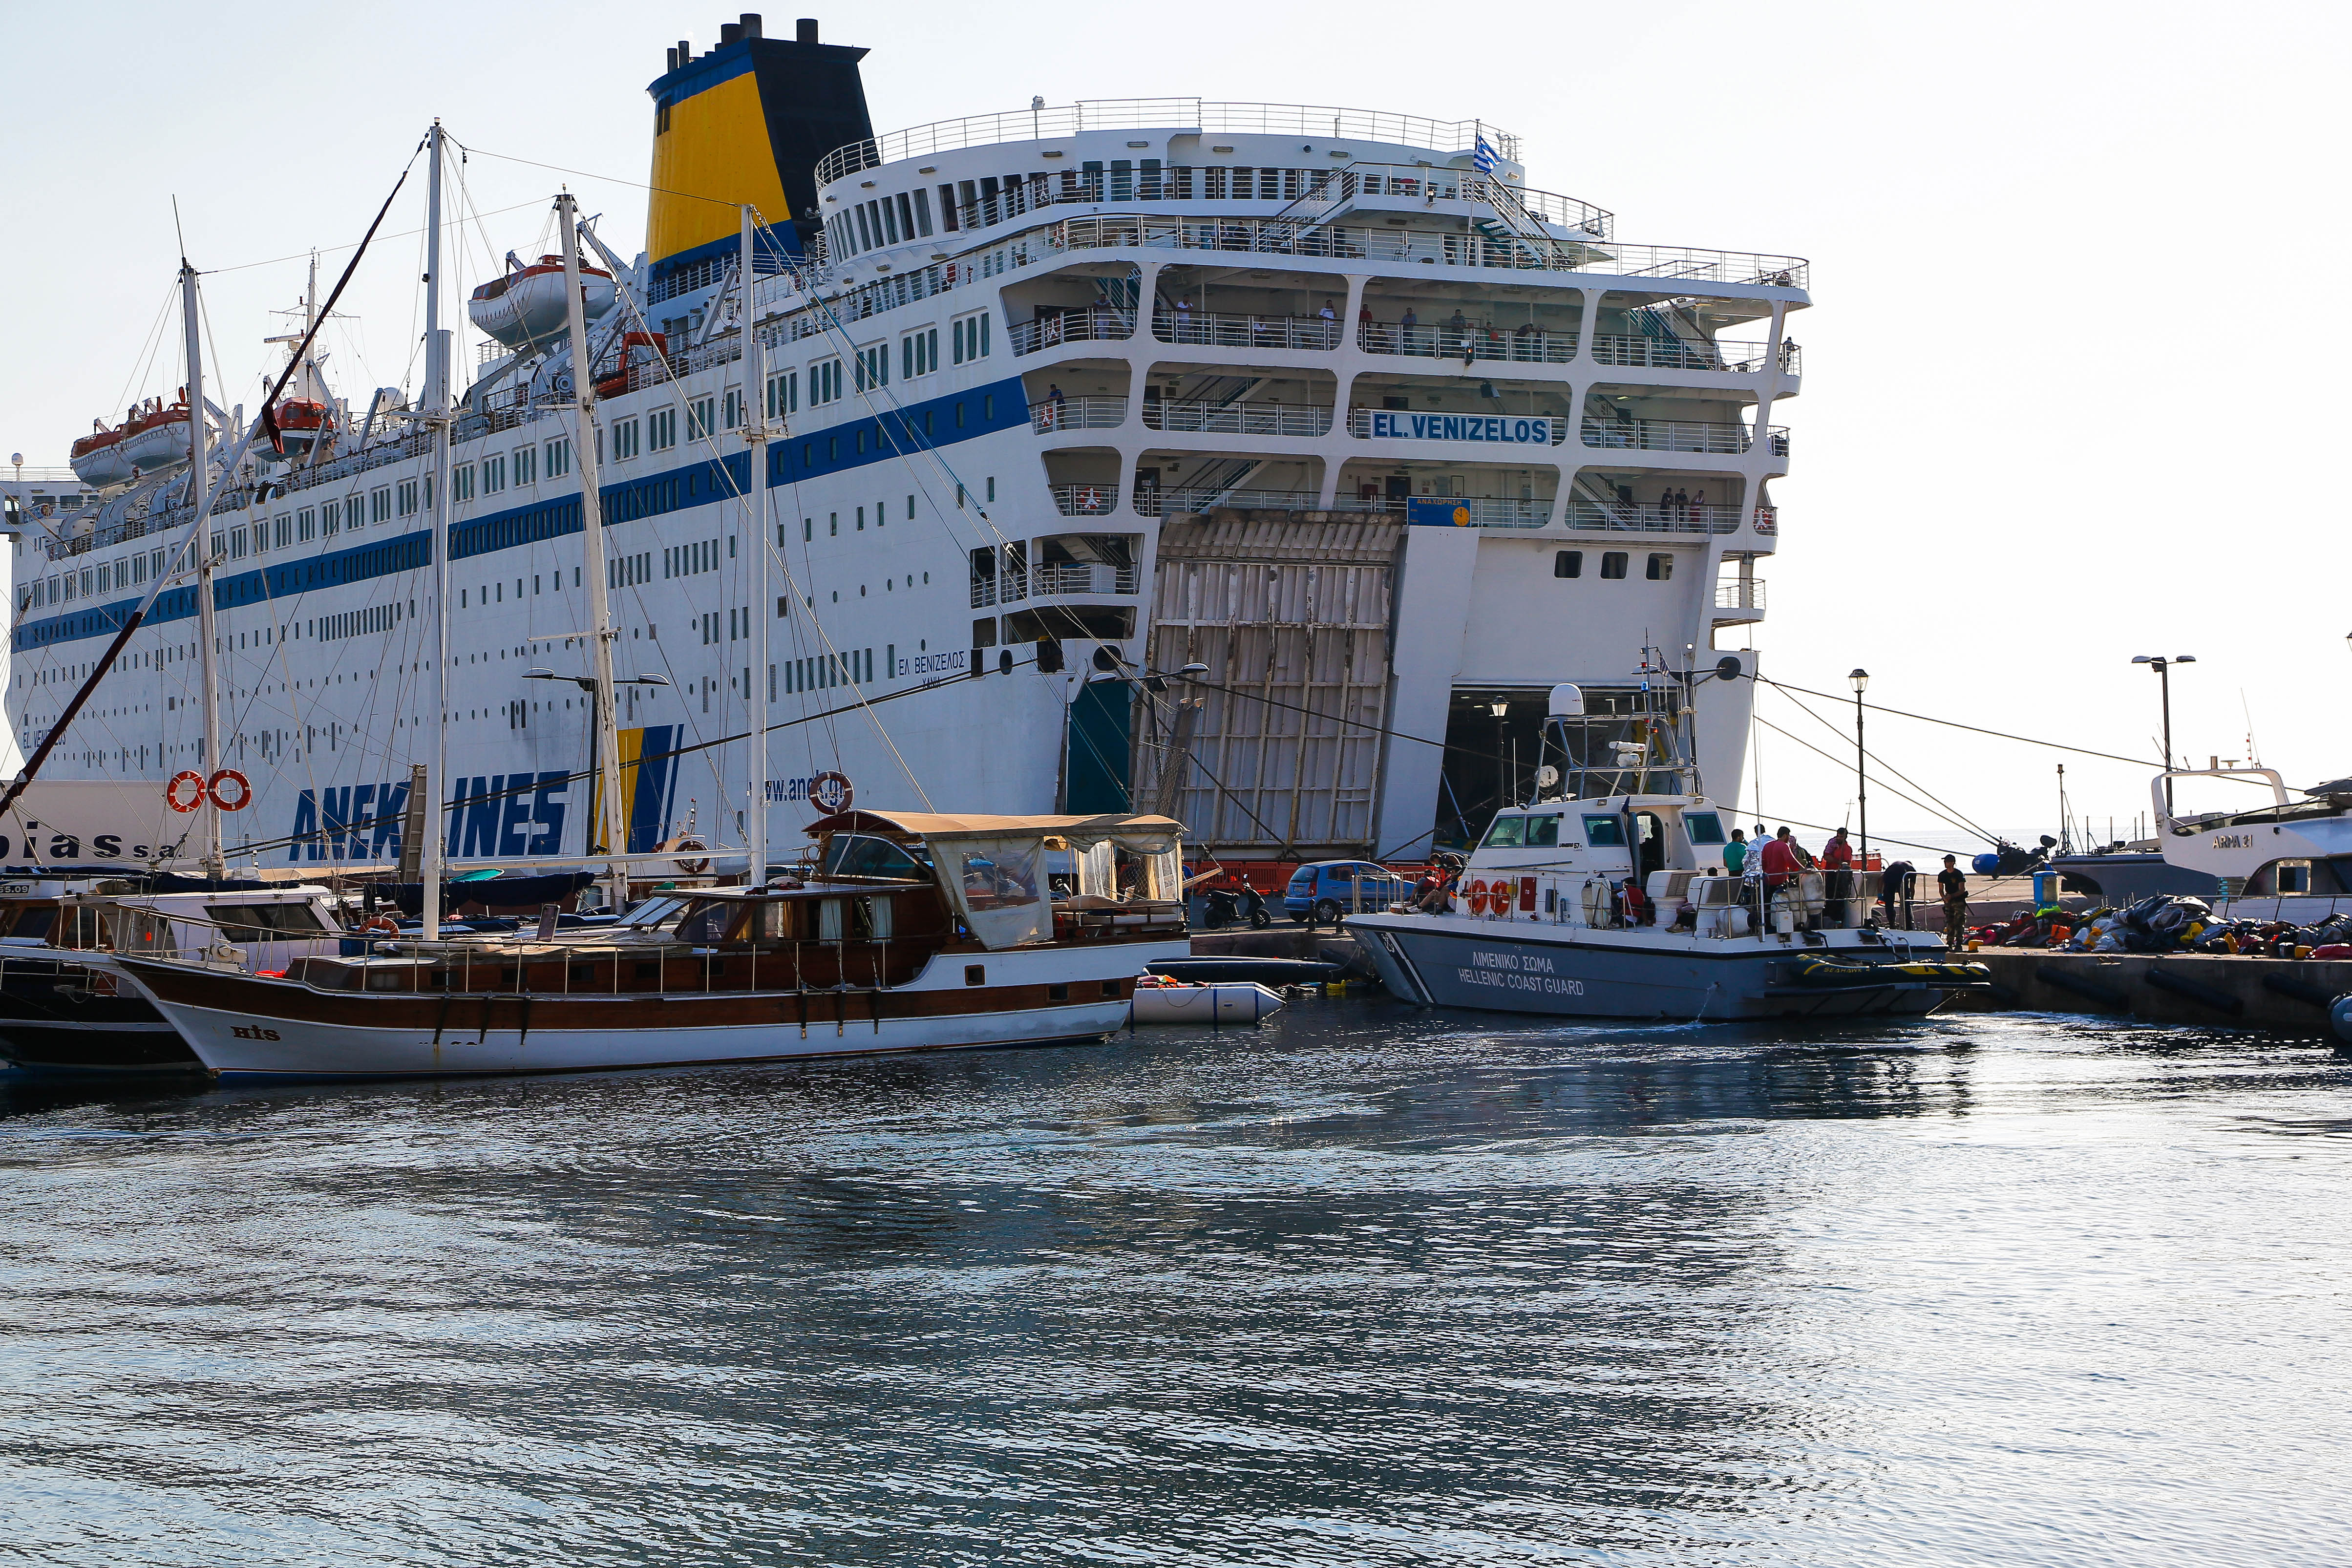 Syrian refugees from Aegean islands arrive in Piraeus via ferry boat